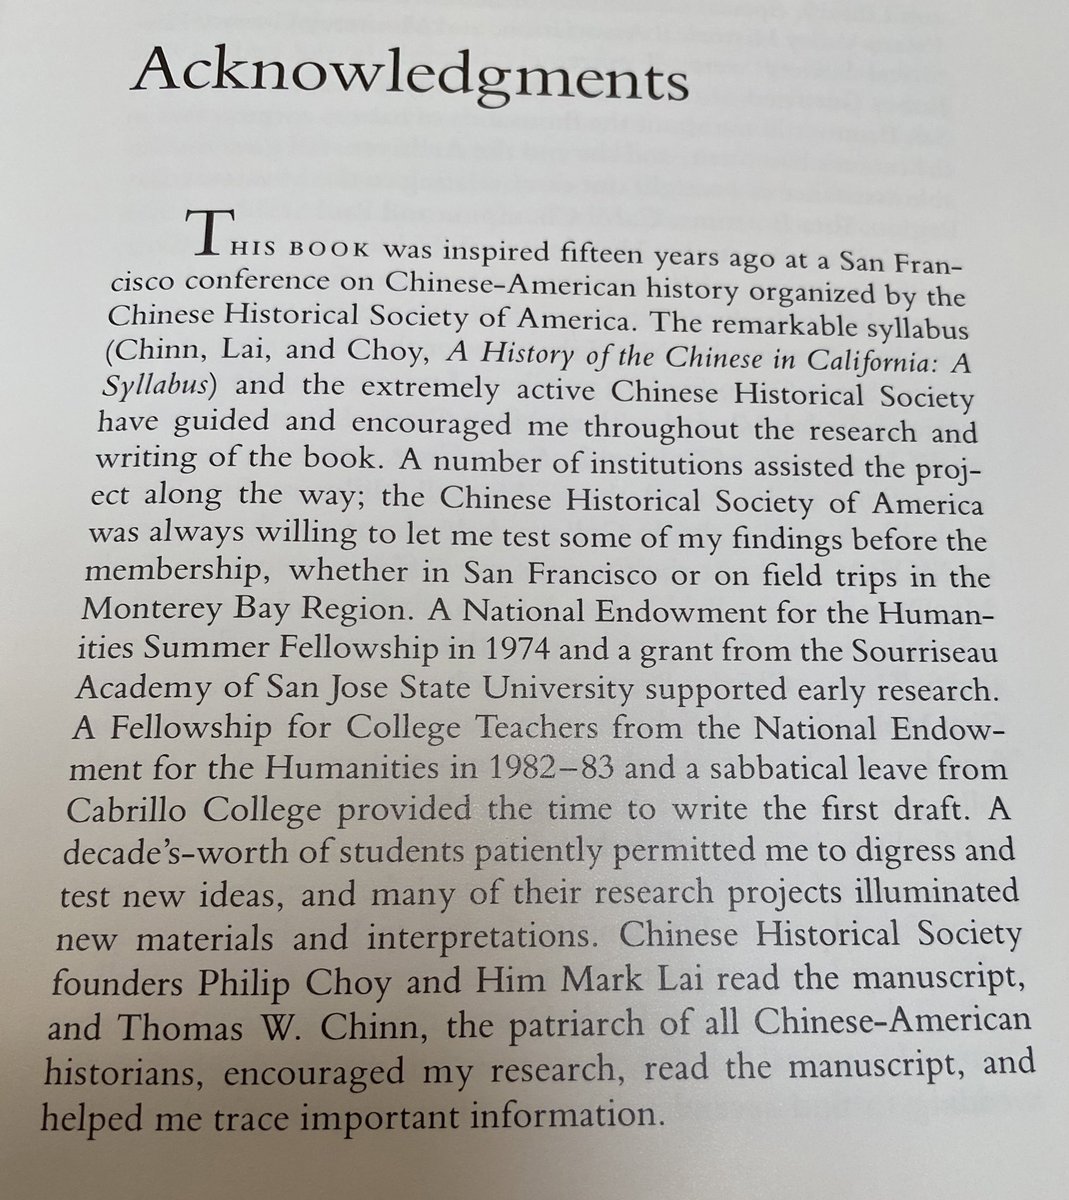 Picked up this out-of-print 1985 treasure of scholarship on the cultural/labor history of  #MontereyBay by Professor Sandy Lydon, Historian Emeritus  @CabrilloCollege. Won Book of the Year, Association for Asian American Studies, research supported by  @sjsu.  http://www.capitolabook.com/chinese.html 